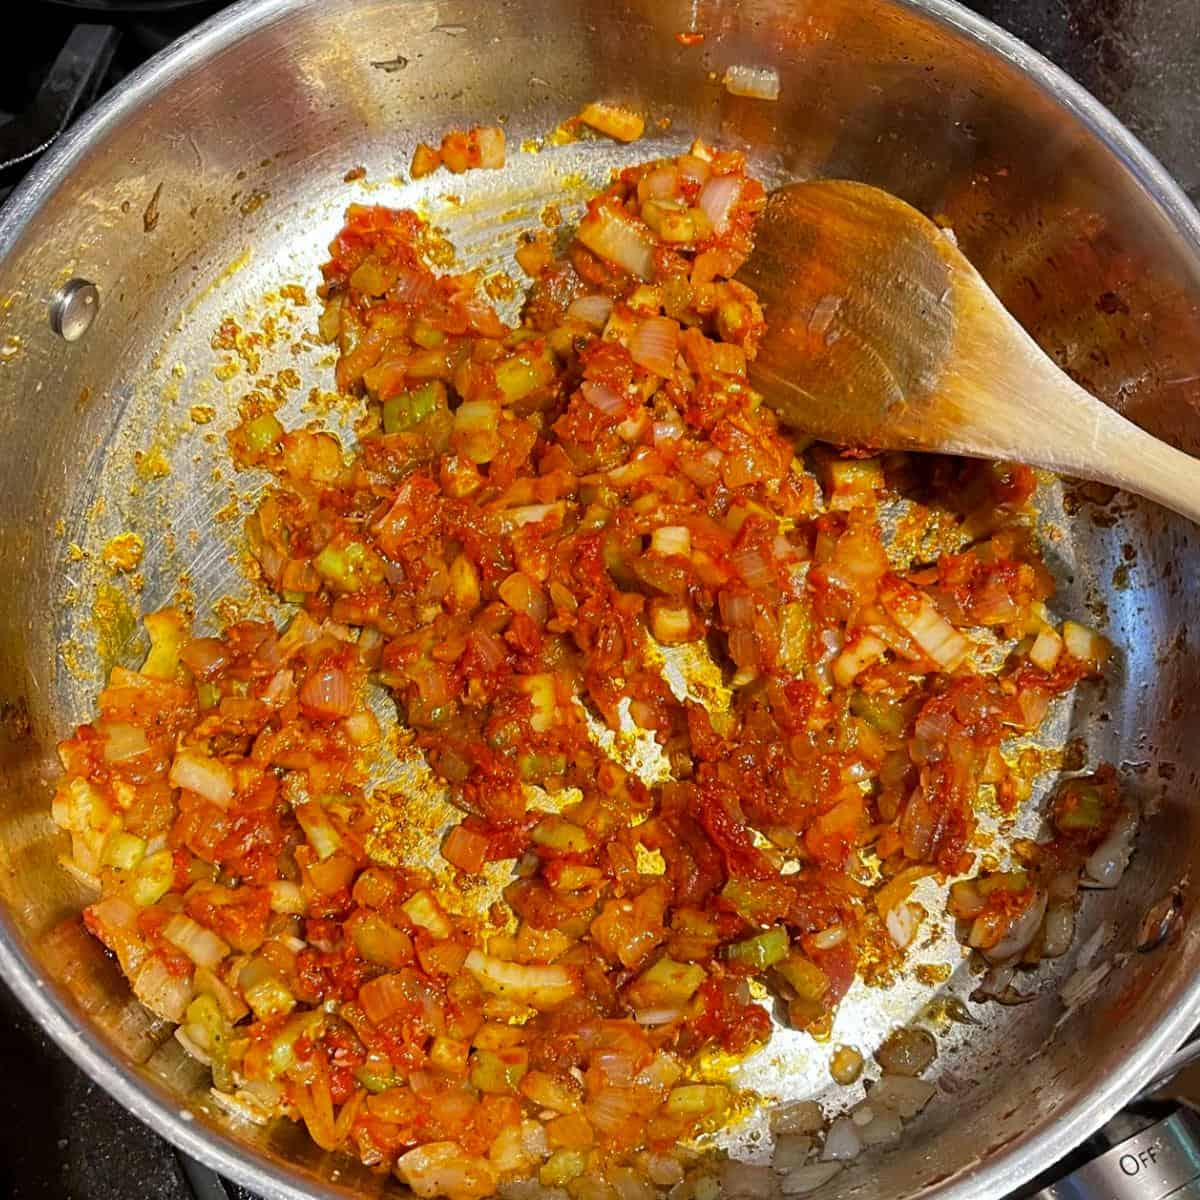 Tomato paste added to bell pepper stuffing in skilelt.